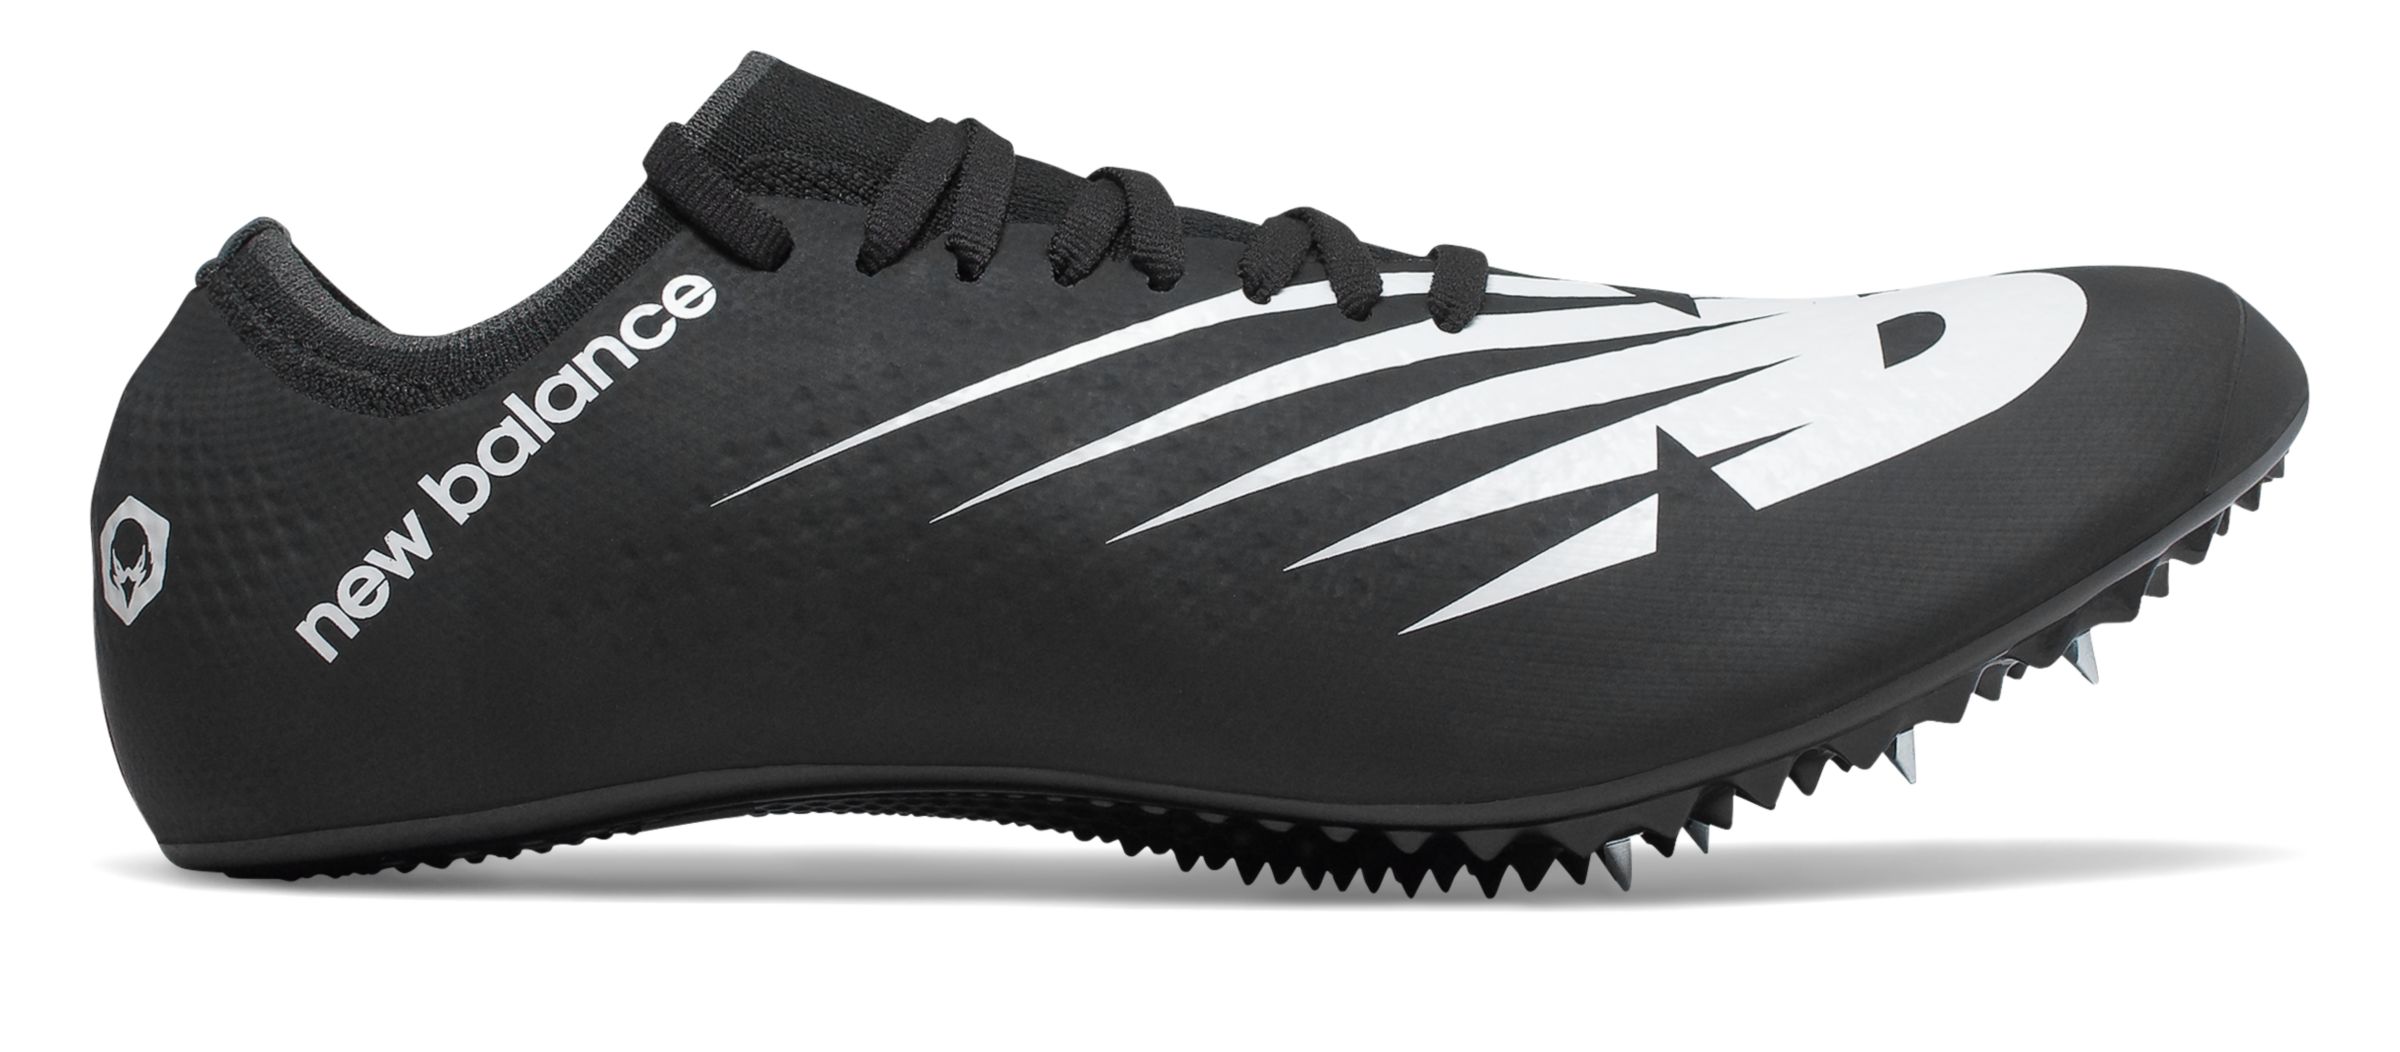 Men's Racing Shoes \u0026 Track Spikes - New 